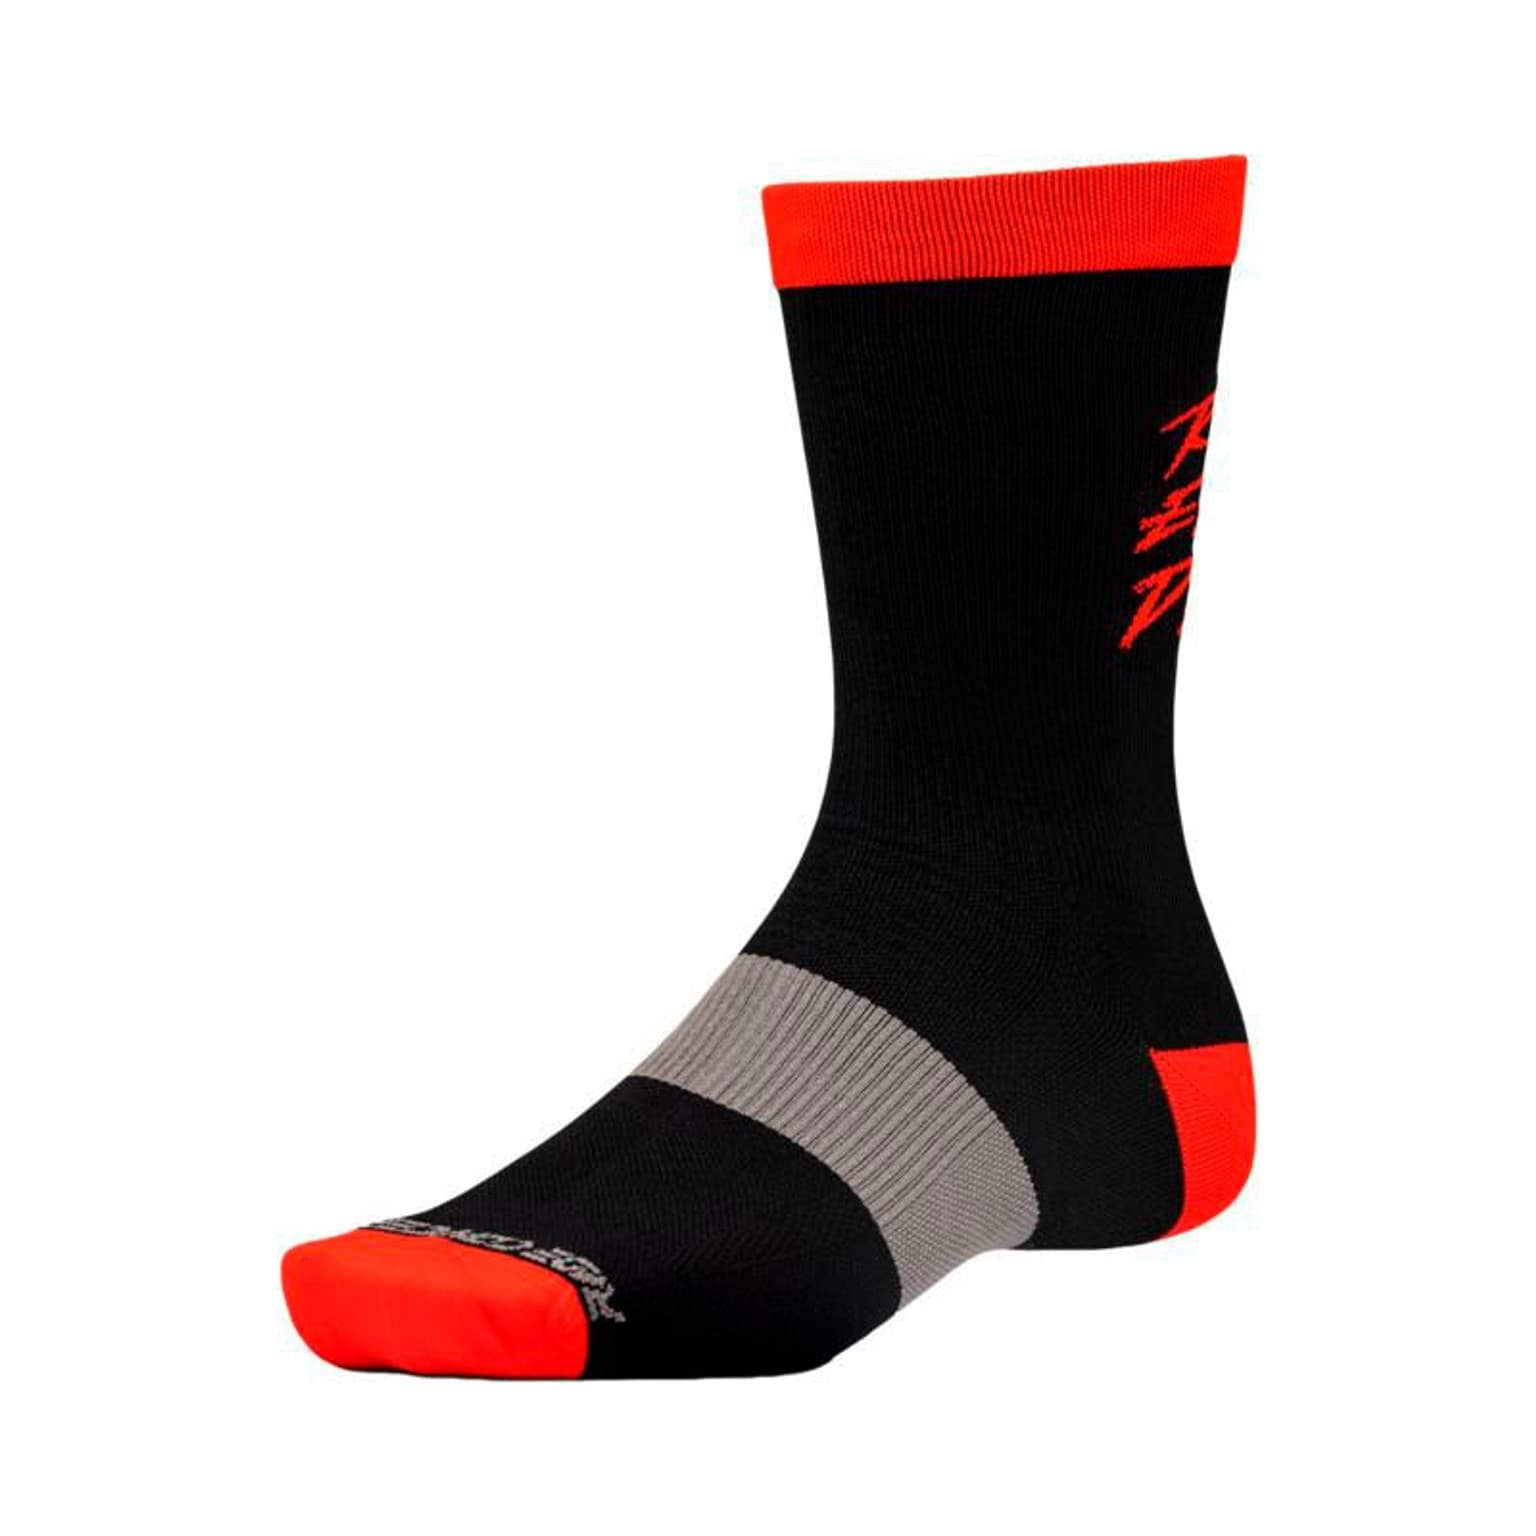 Ride Concepts Ride Concepts Ride Every Day Synthetic Velosocken rot 2